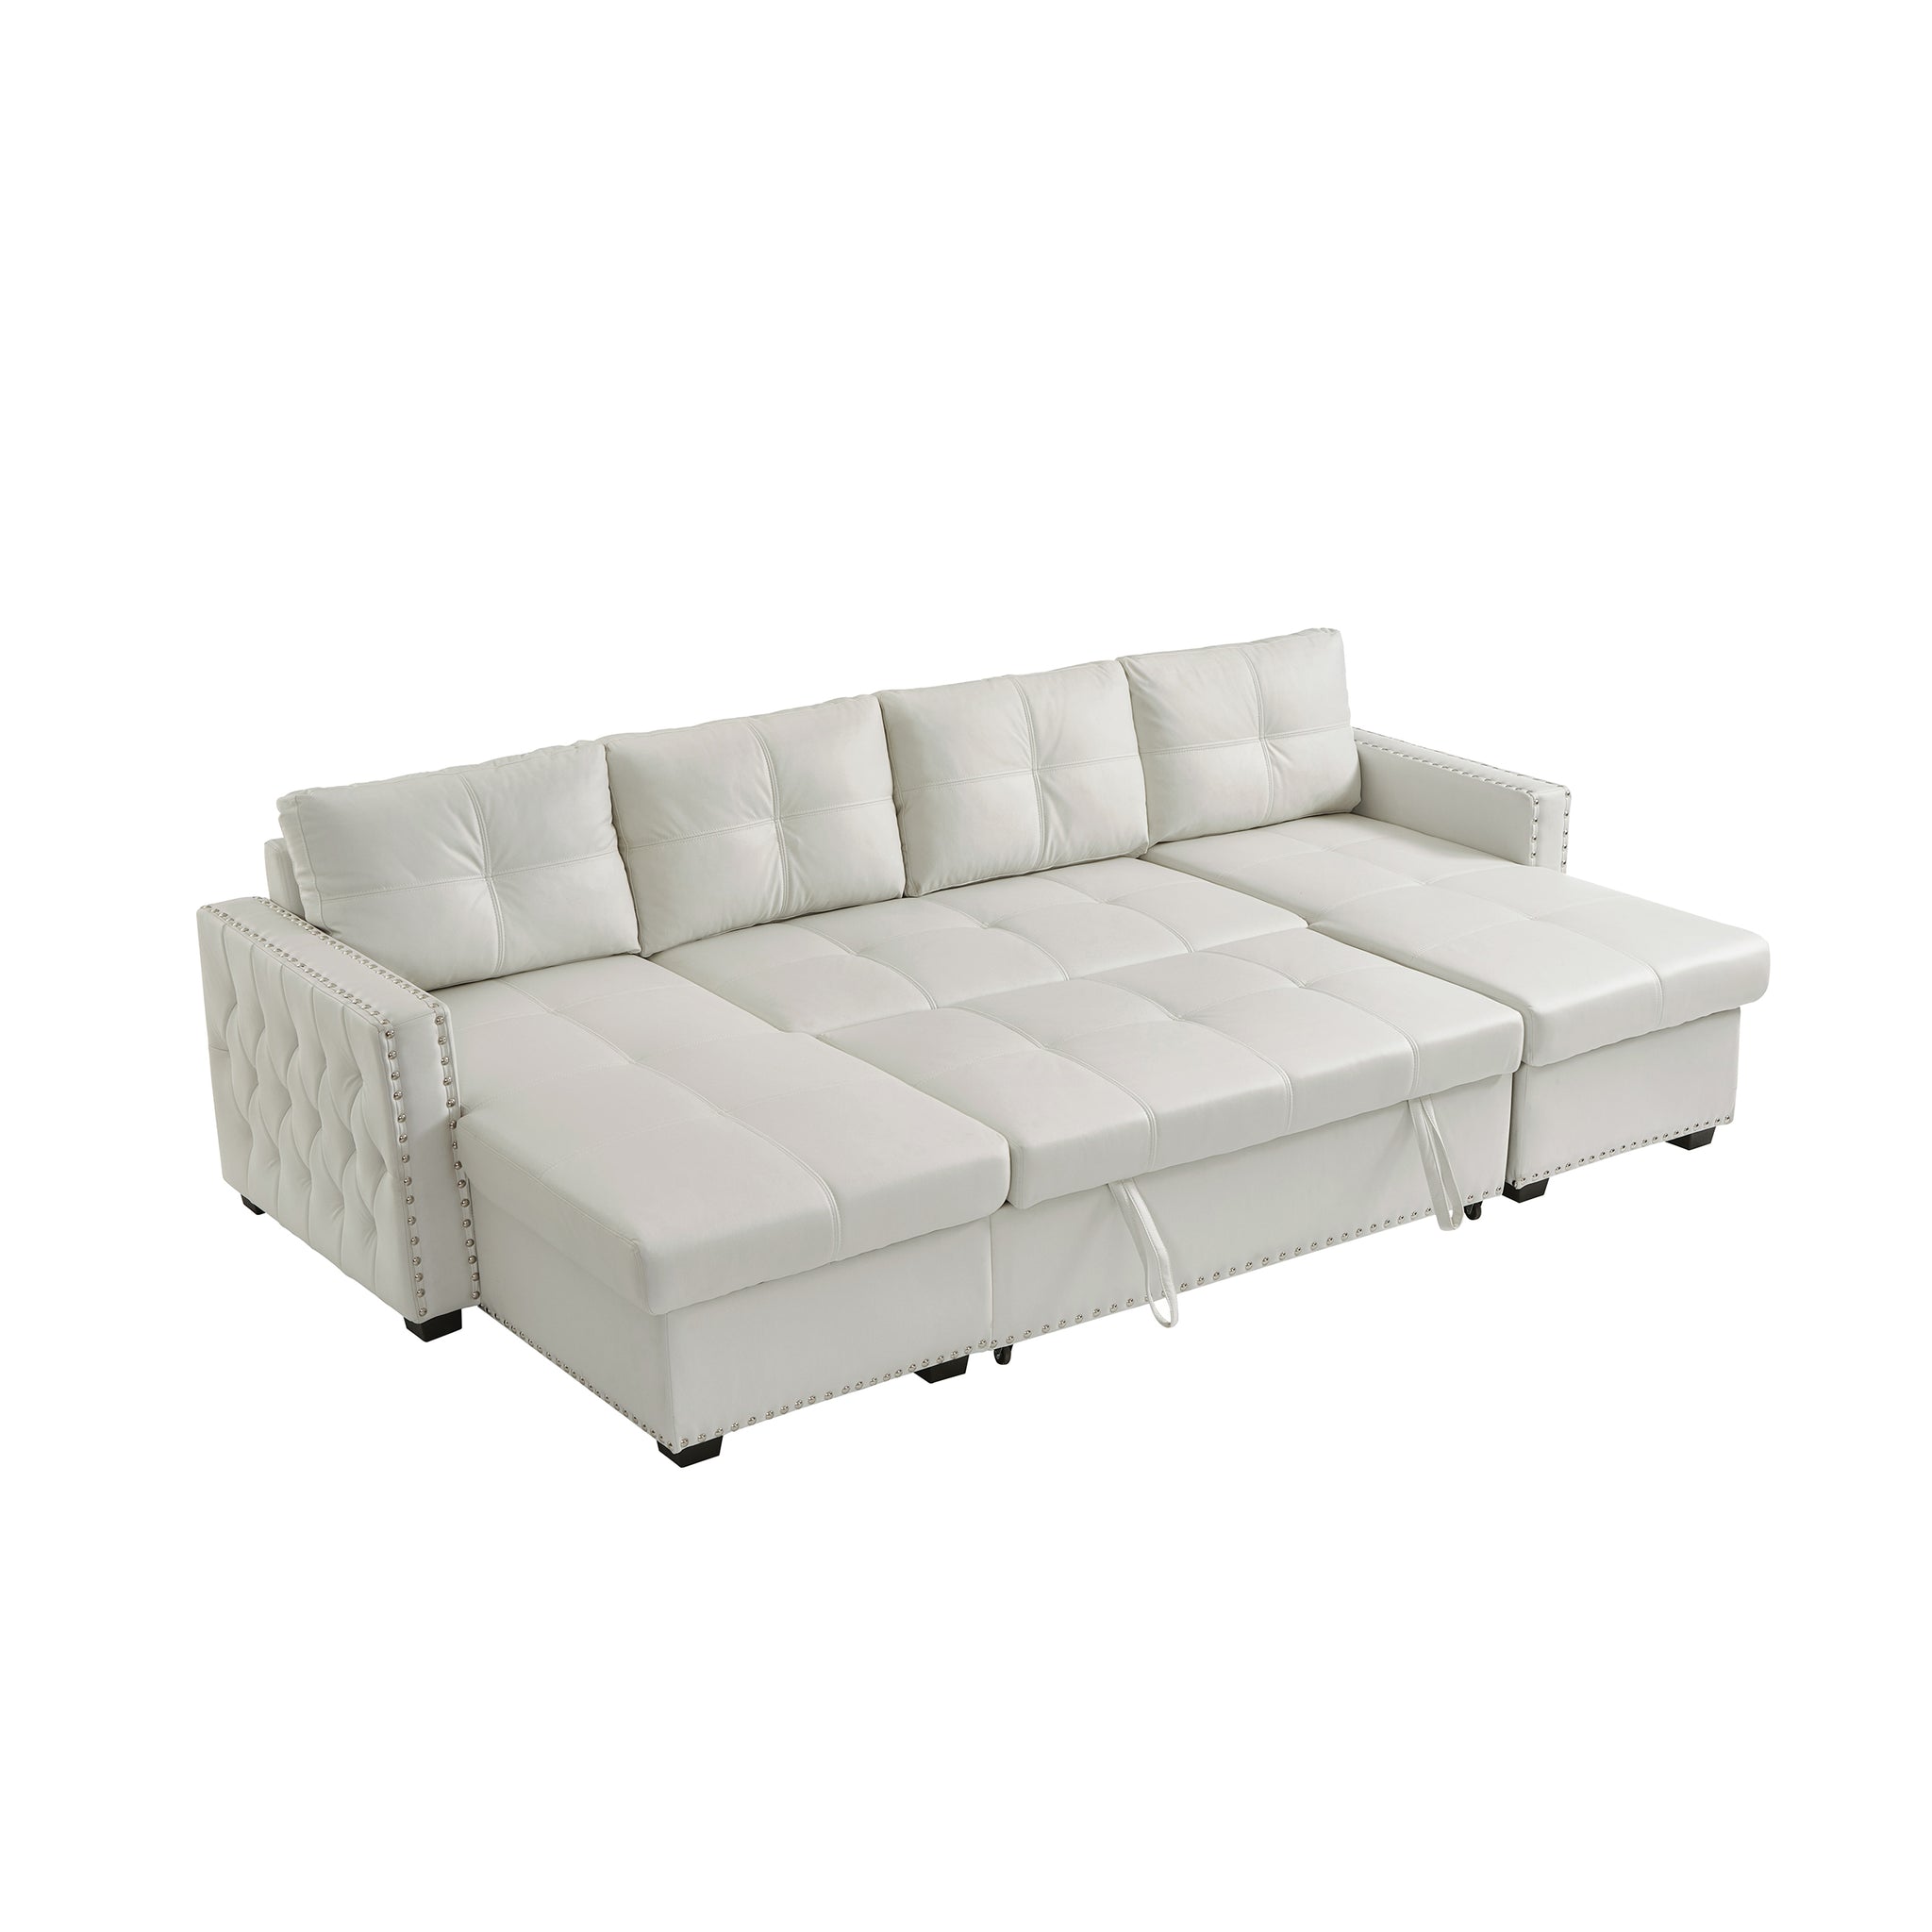 114" Convertible Pull Out Sofa Bed with Storage Chaise beige-microfiber